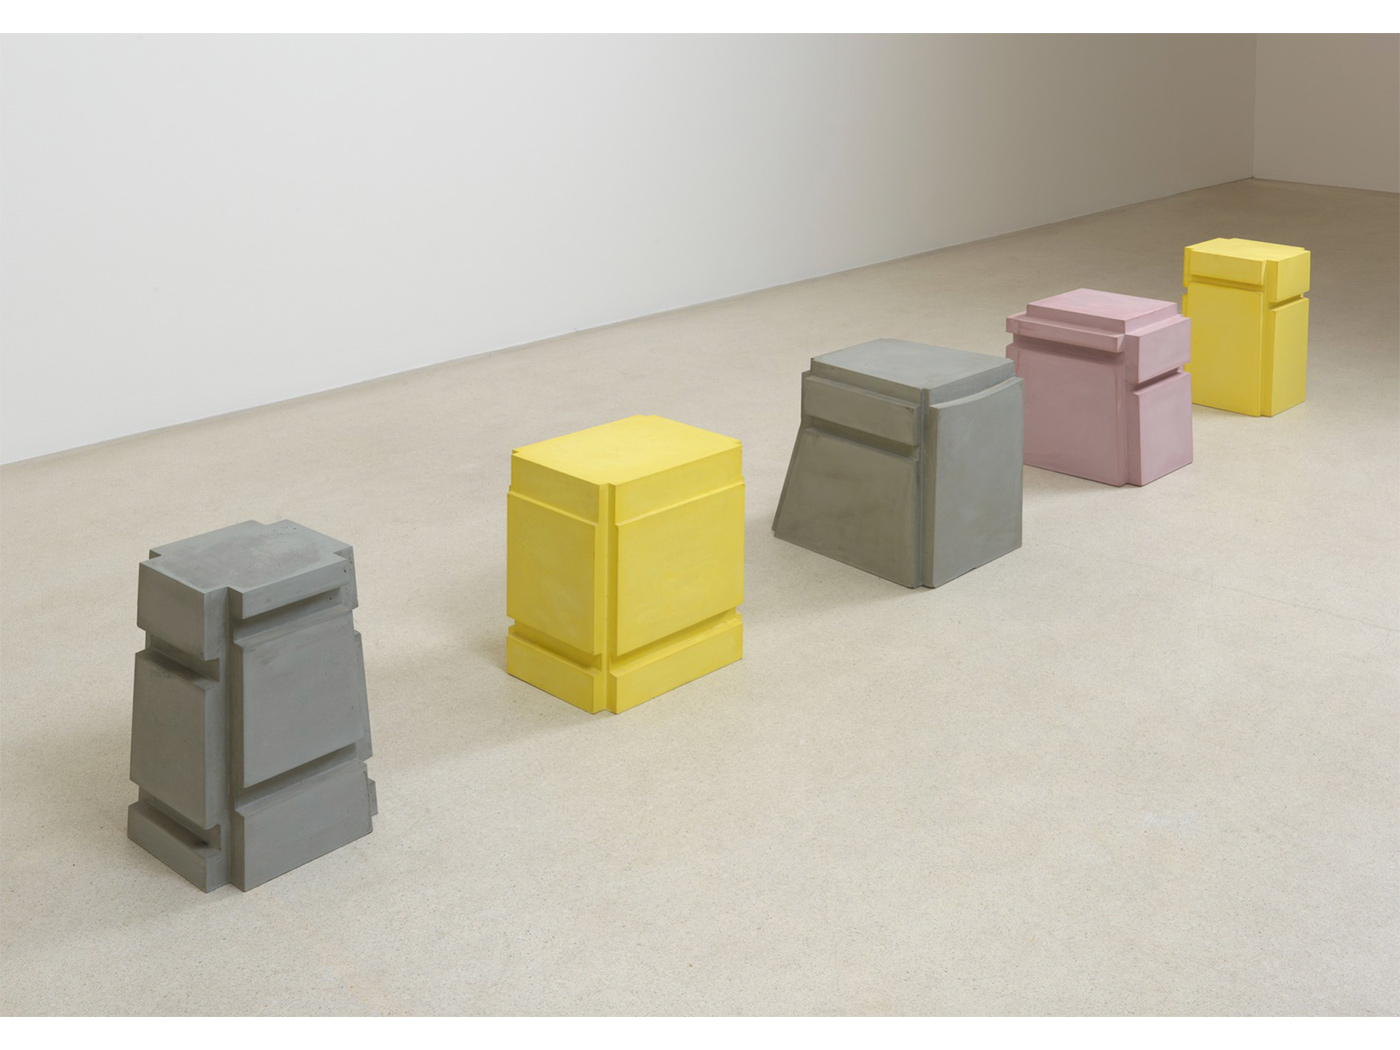 Whiteread's sculptures examine the negative space surrounding or contained by objects, such as casts of the area beneath chairs. As seen here in 'Untitled' (2010)